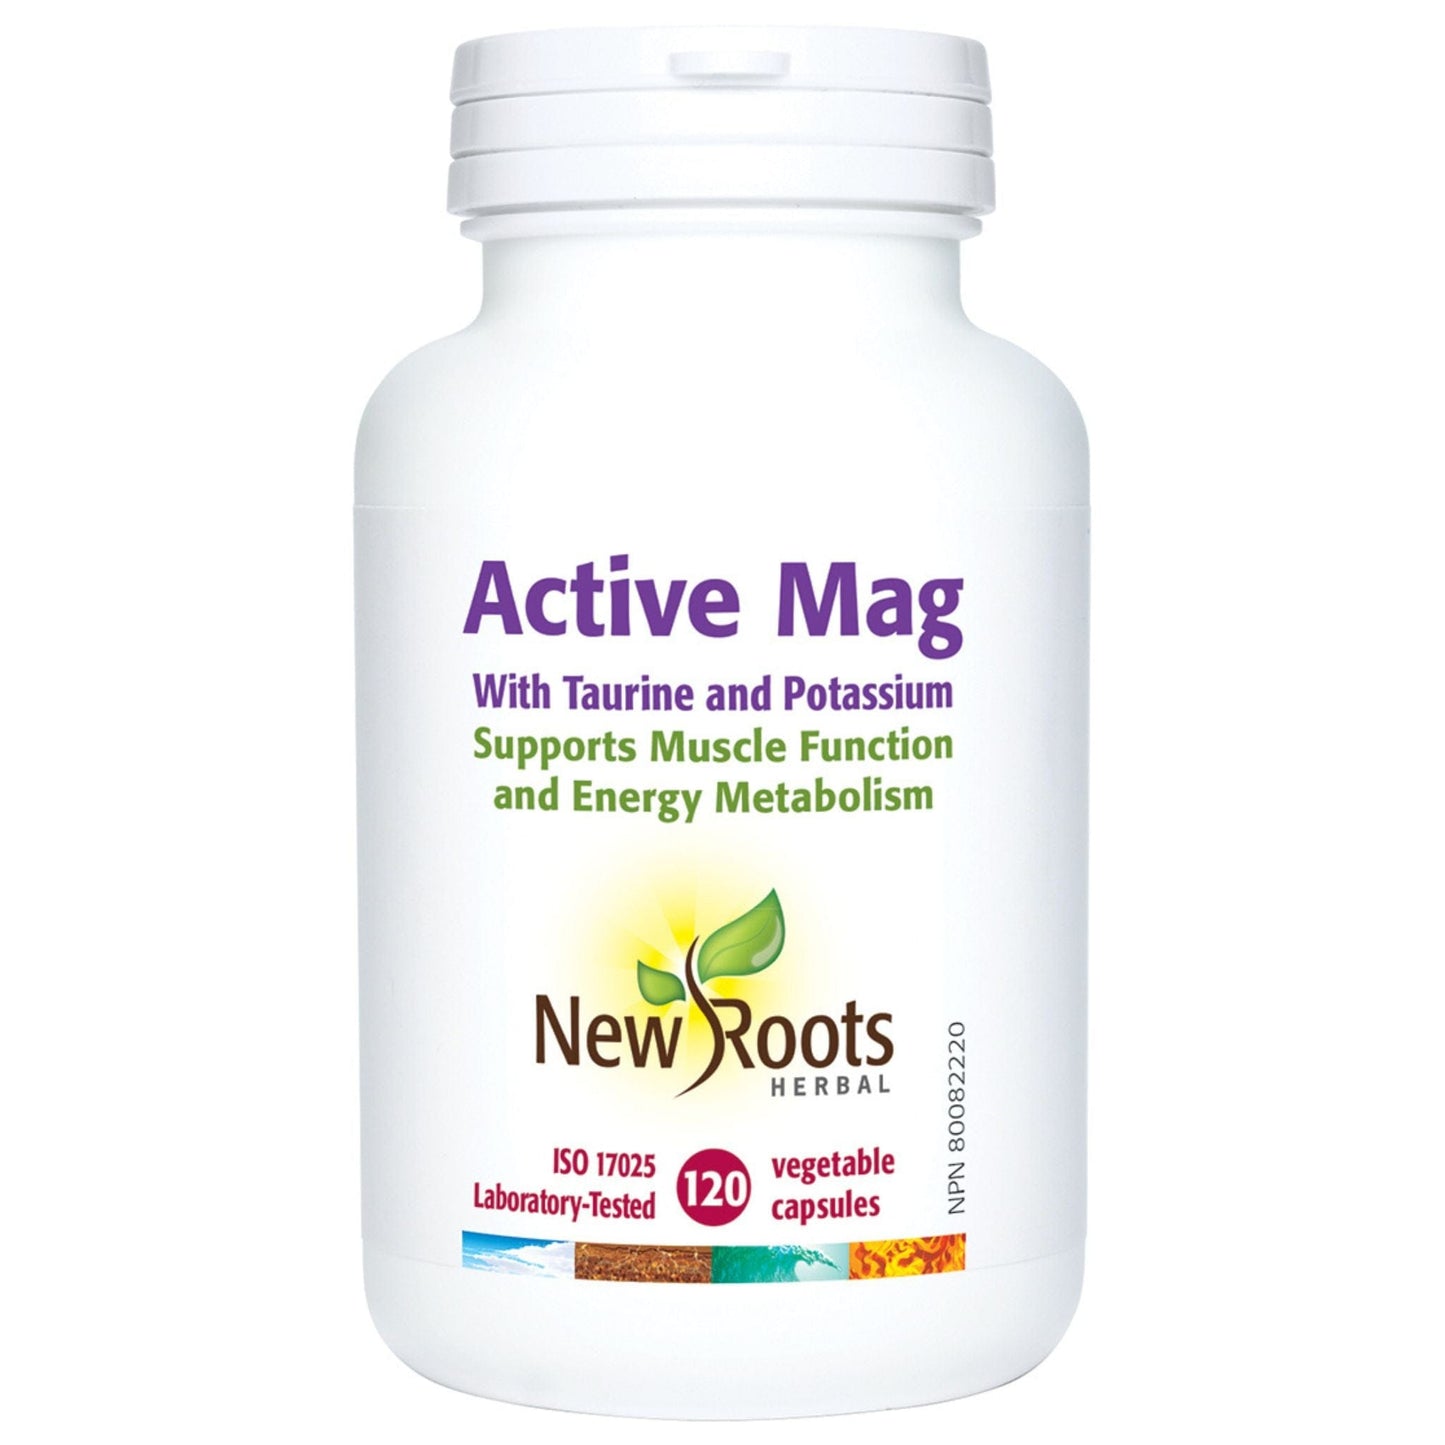 120 Vegetable Capsules | New Roots Herbal Active Mag with Taurine and Potassium